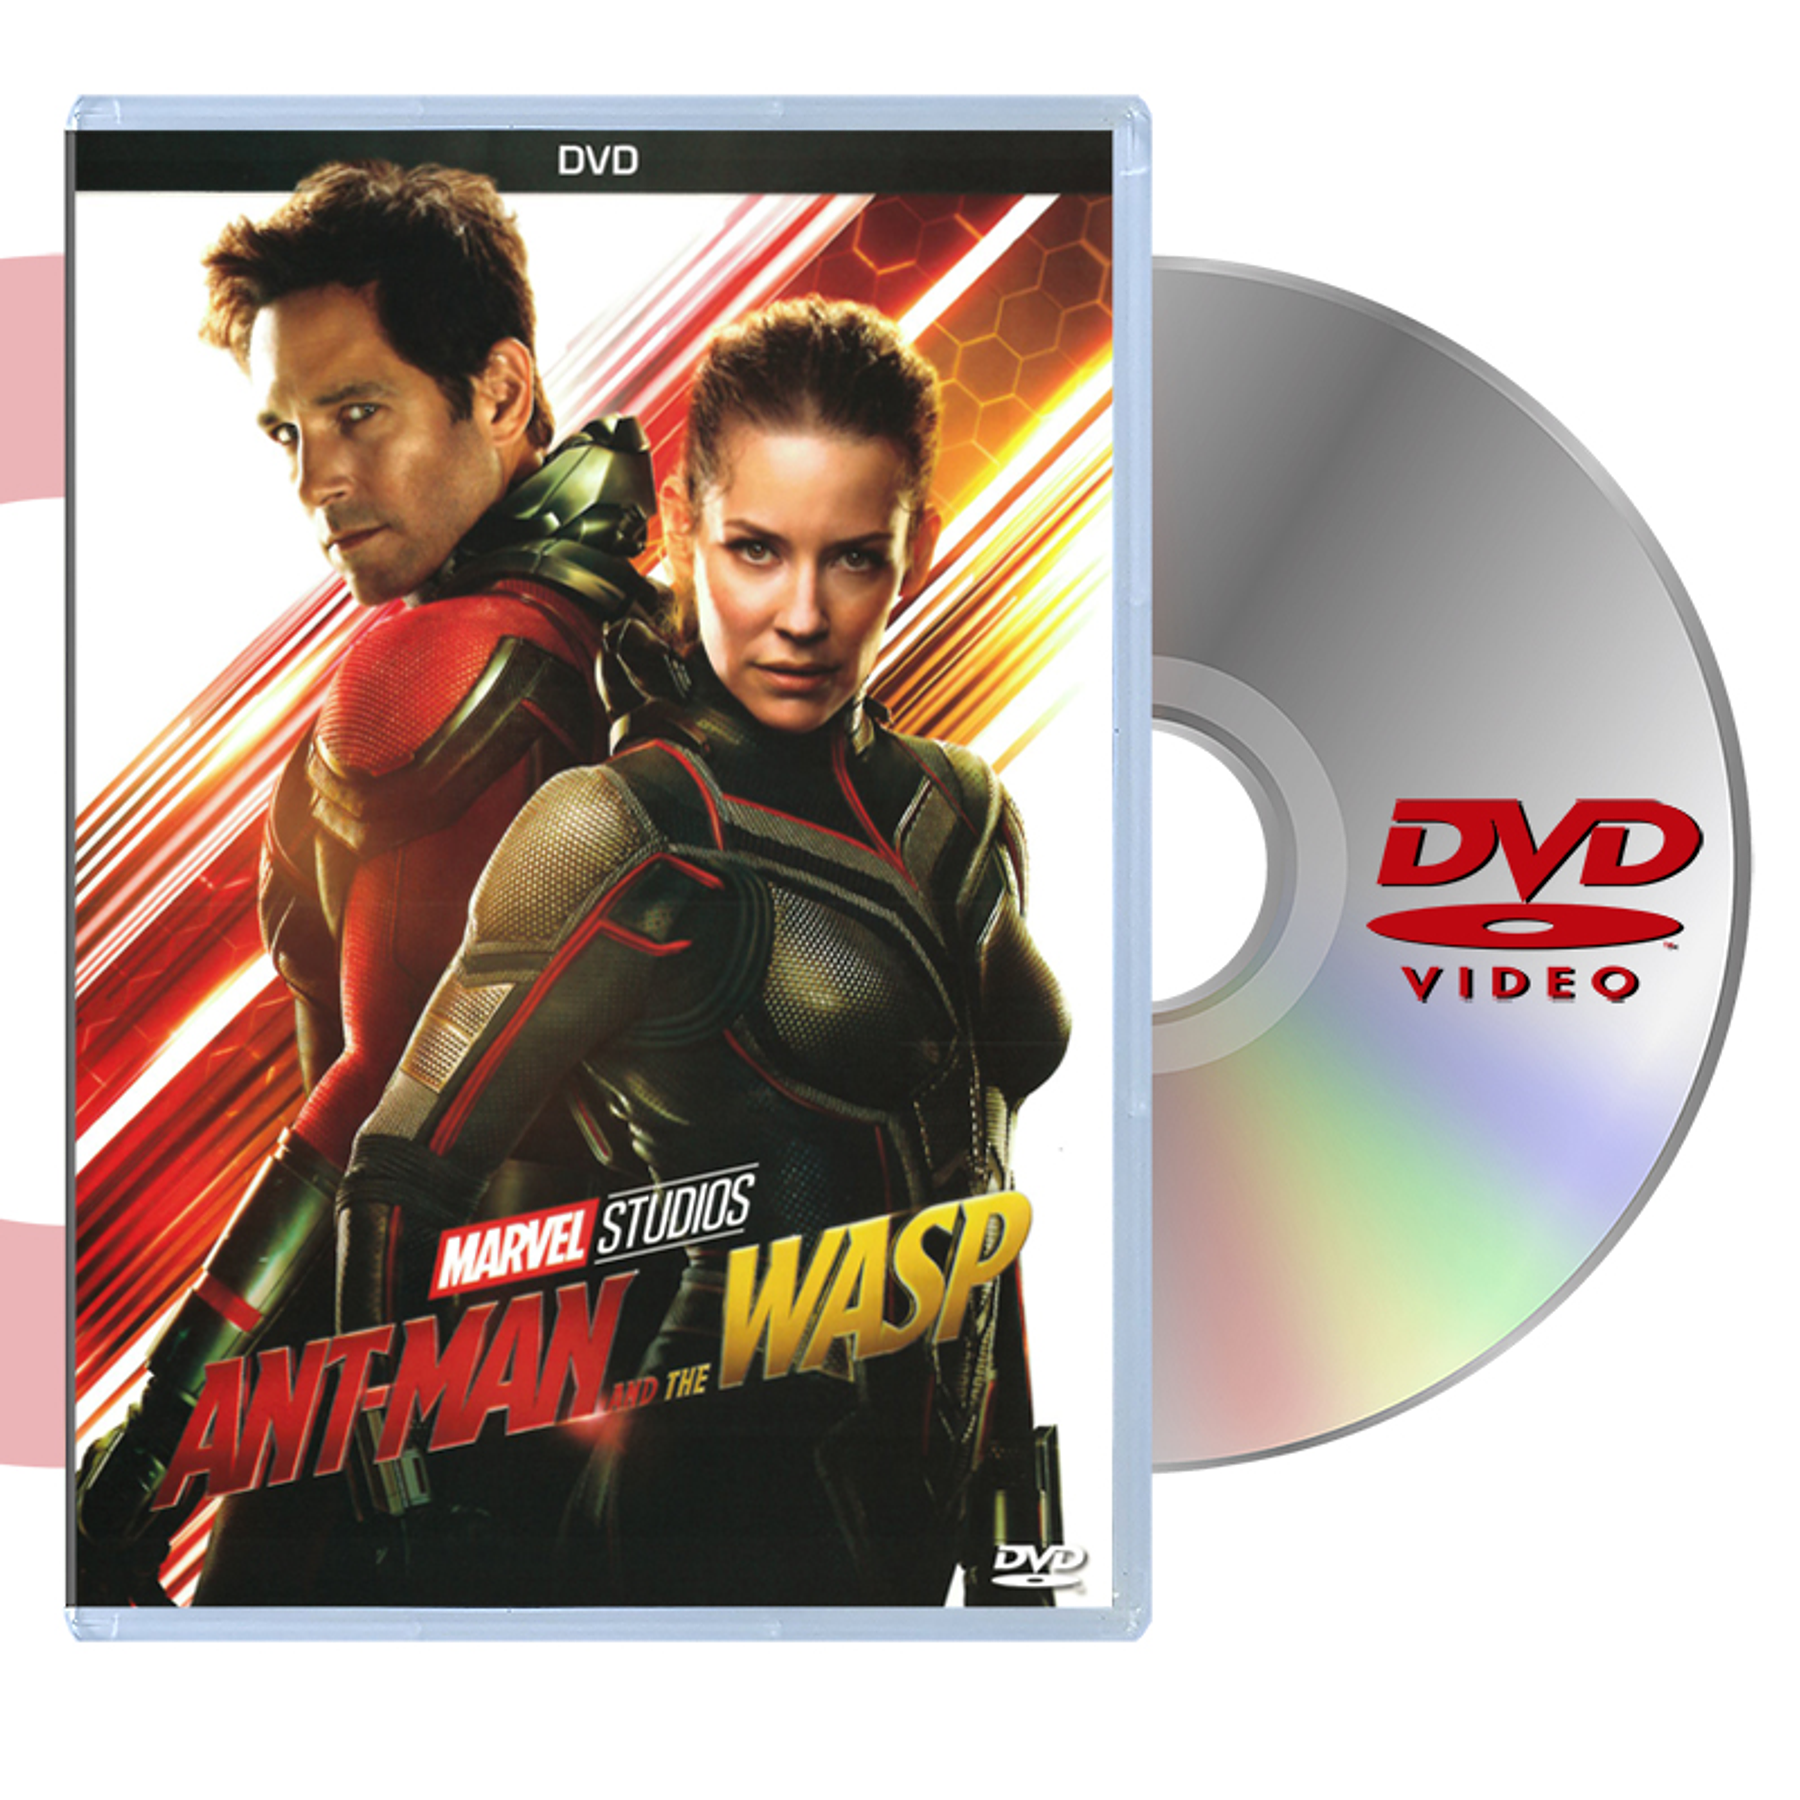 DVD ANT-MAN AND THE WASP